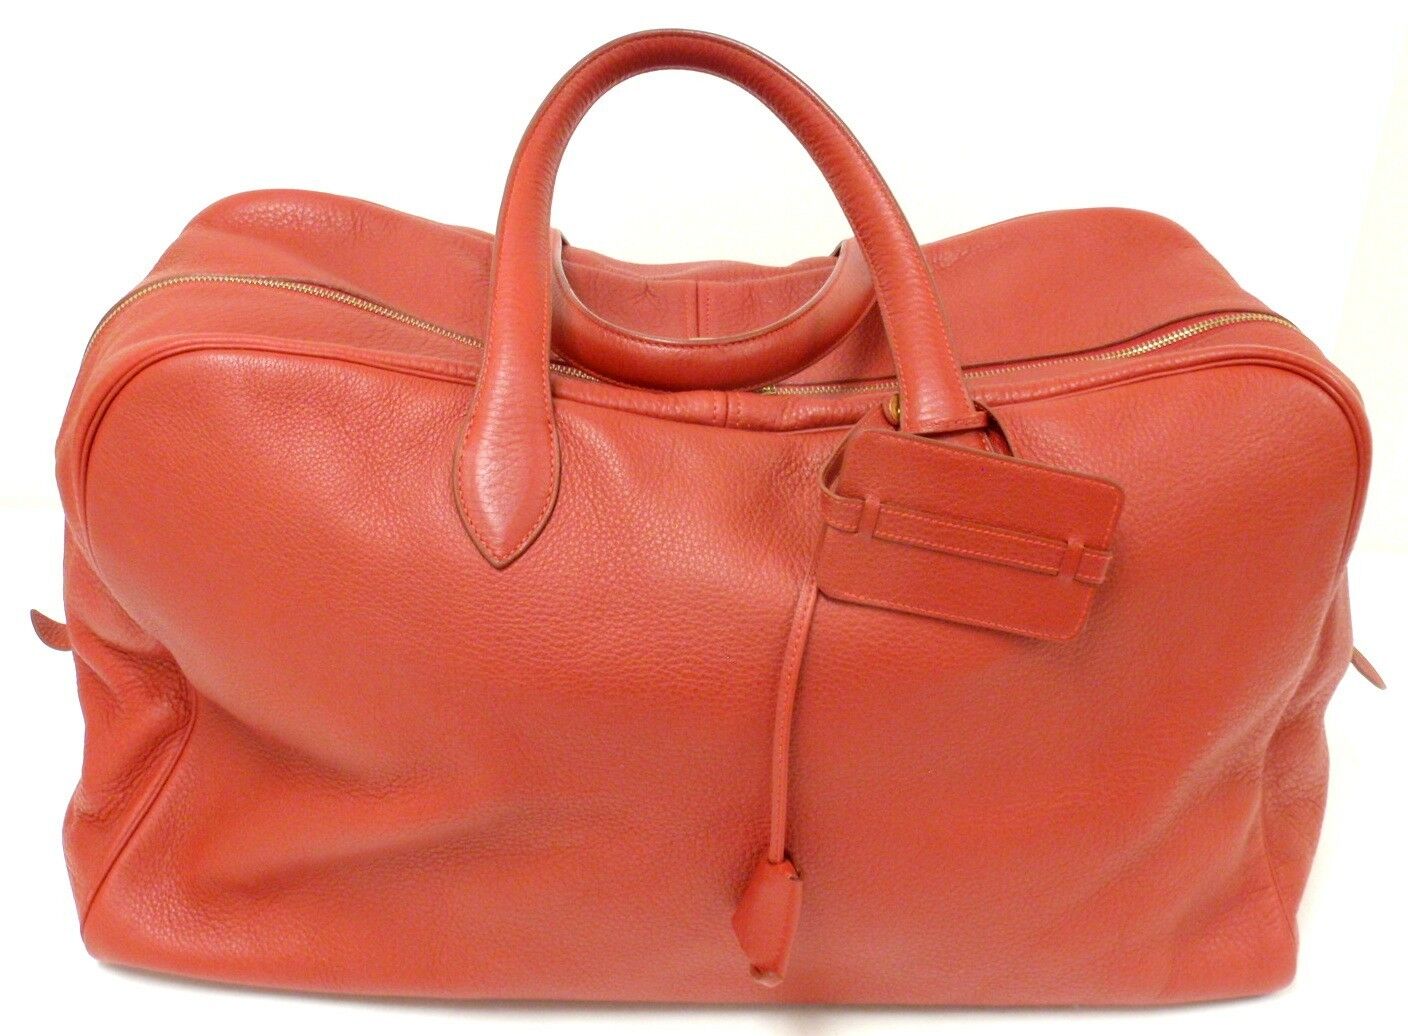 AUTHENTIC! HERMES 50CM VICTORIA RED CLEMENCE TRAVEL TOTE GHW